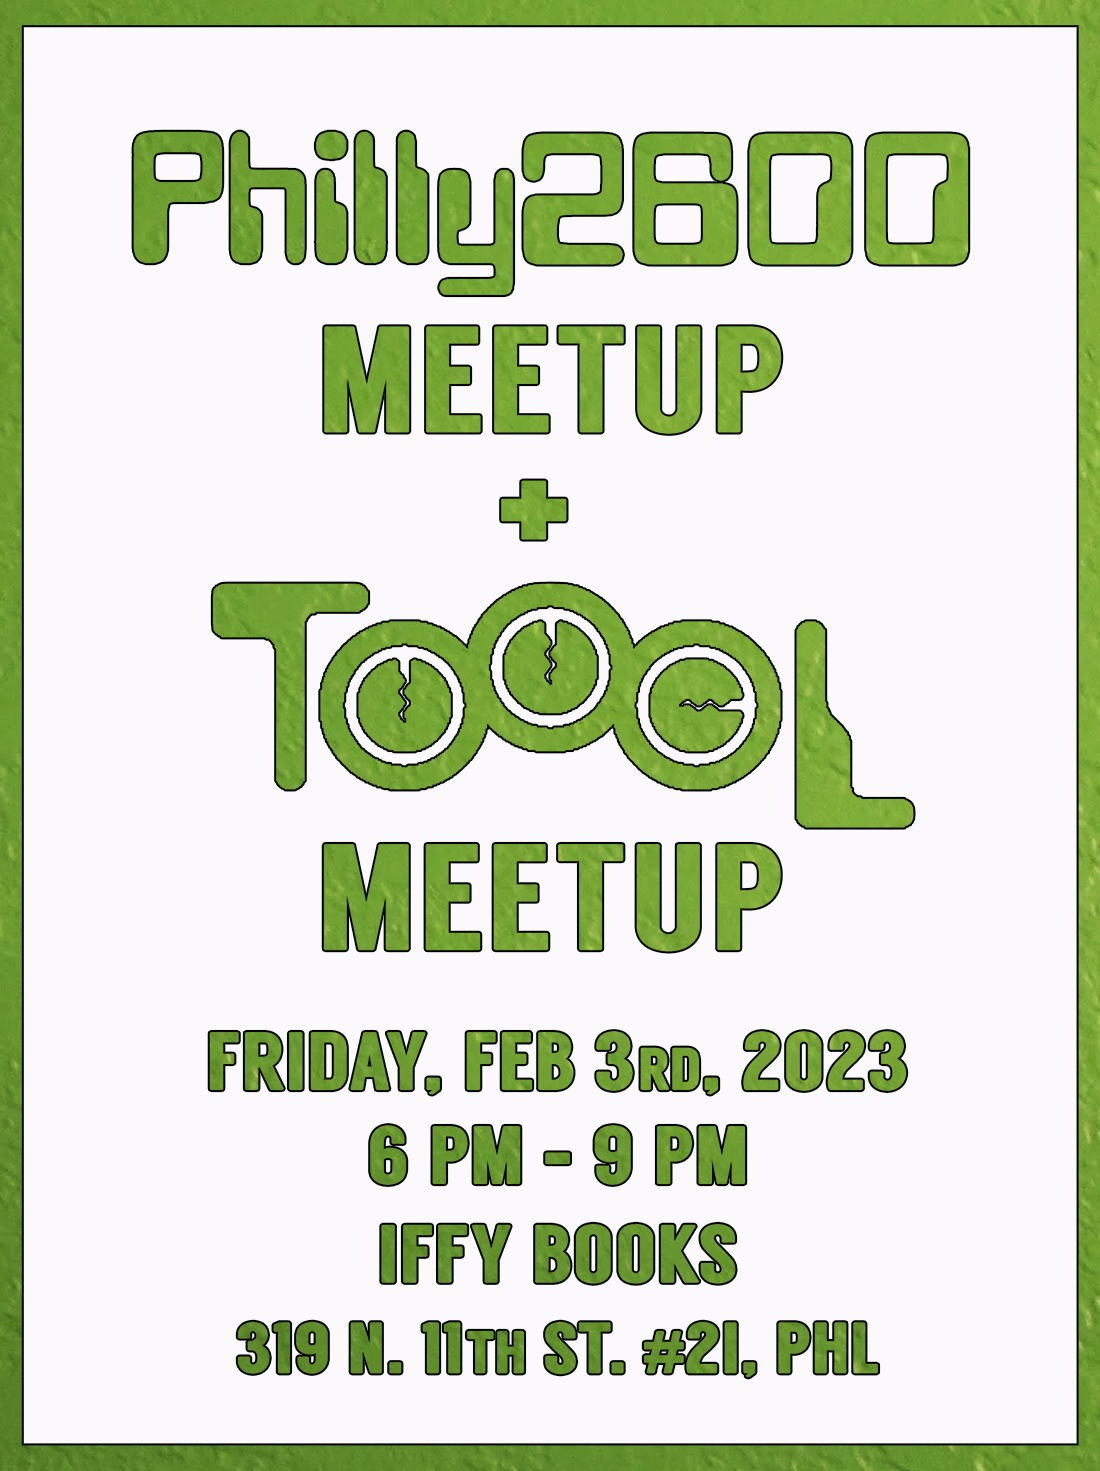 Flyer with the following text in green: Philly 2600 Meetup + TOOOL Meetup / Friday, Feb 3rd, 2023 / 6 PM - 9 PM / Iffy Books / 319 N. 11th St. #2I, PHL